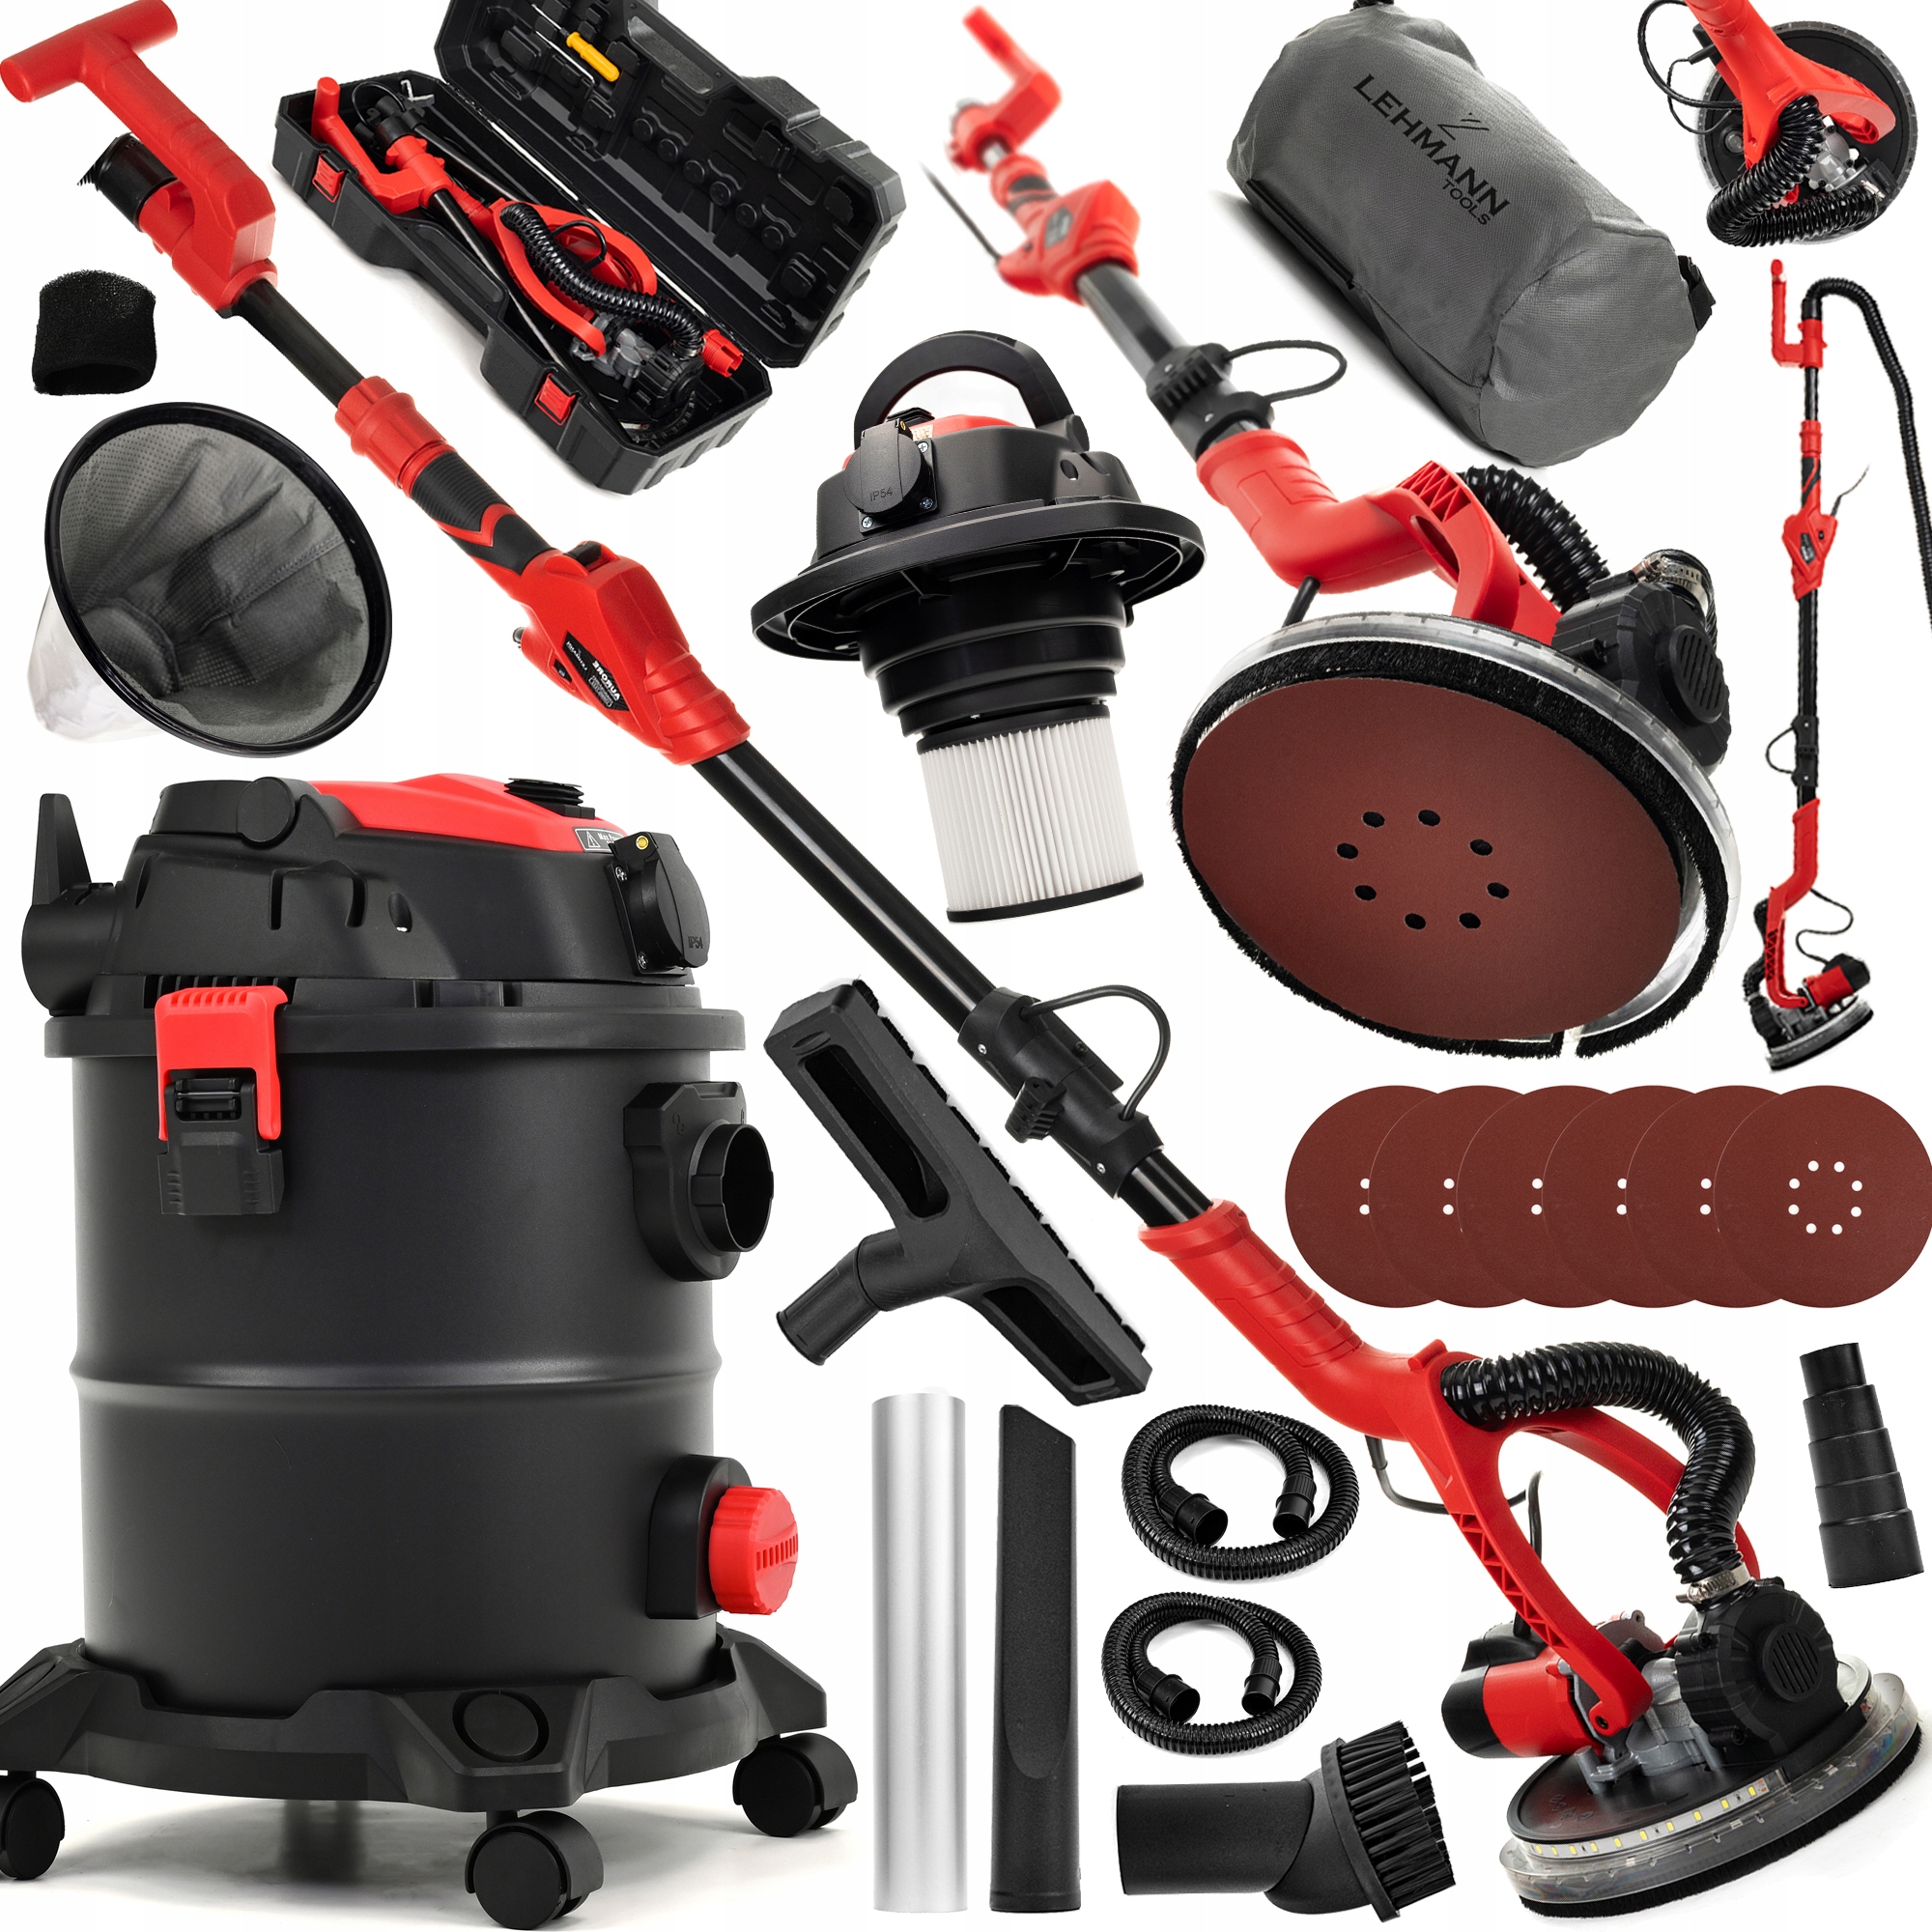 FIXTEC 2000W Wet and Dry Vacuum Cleaner